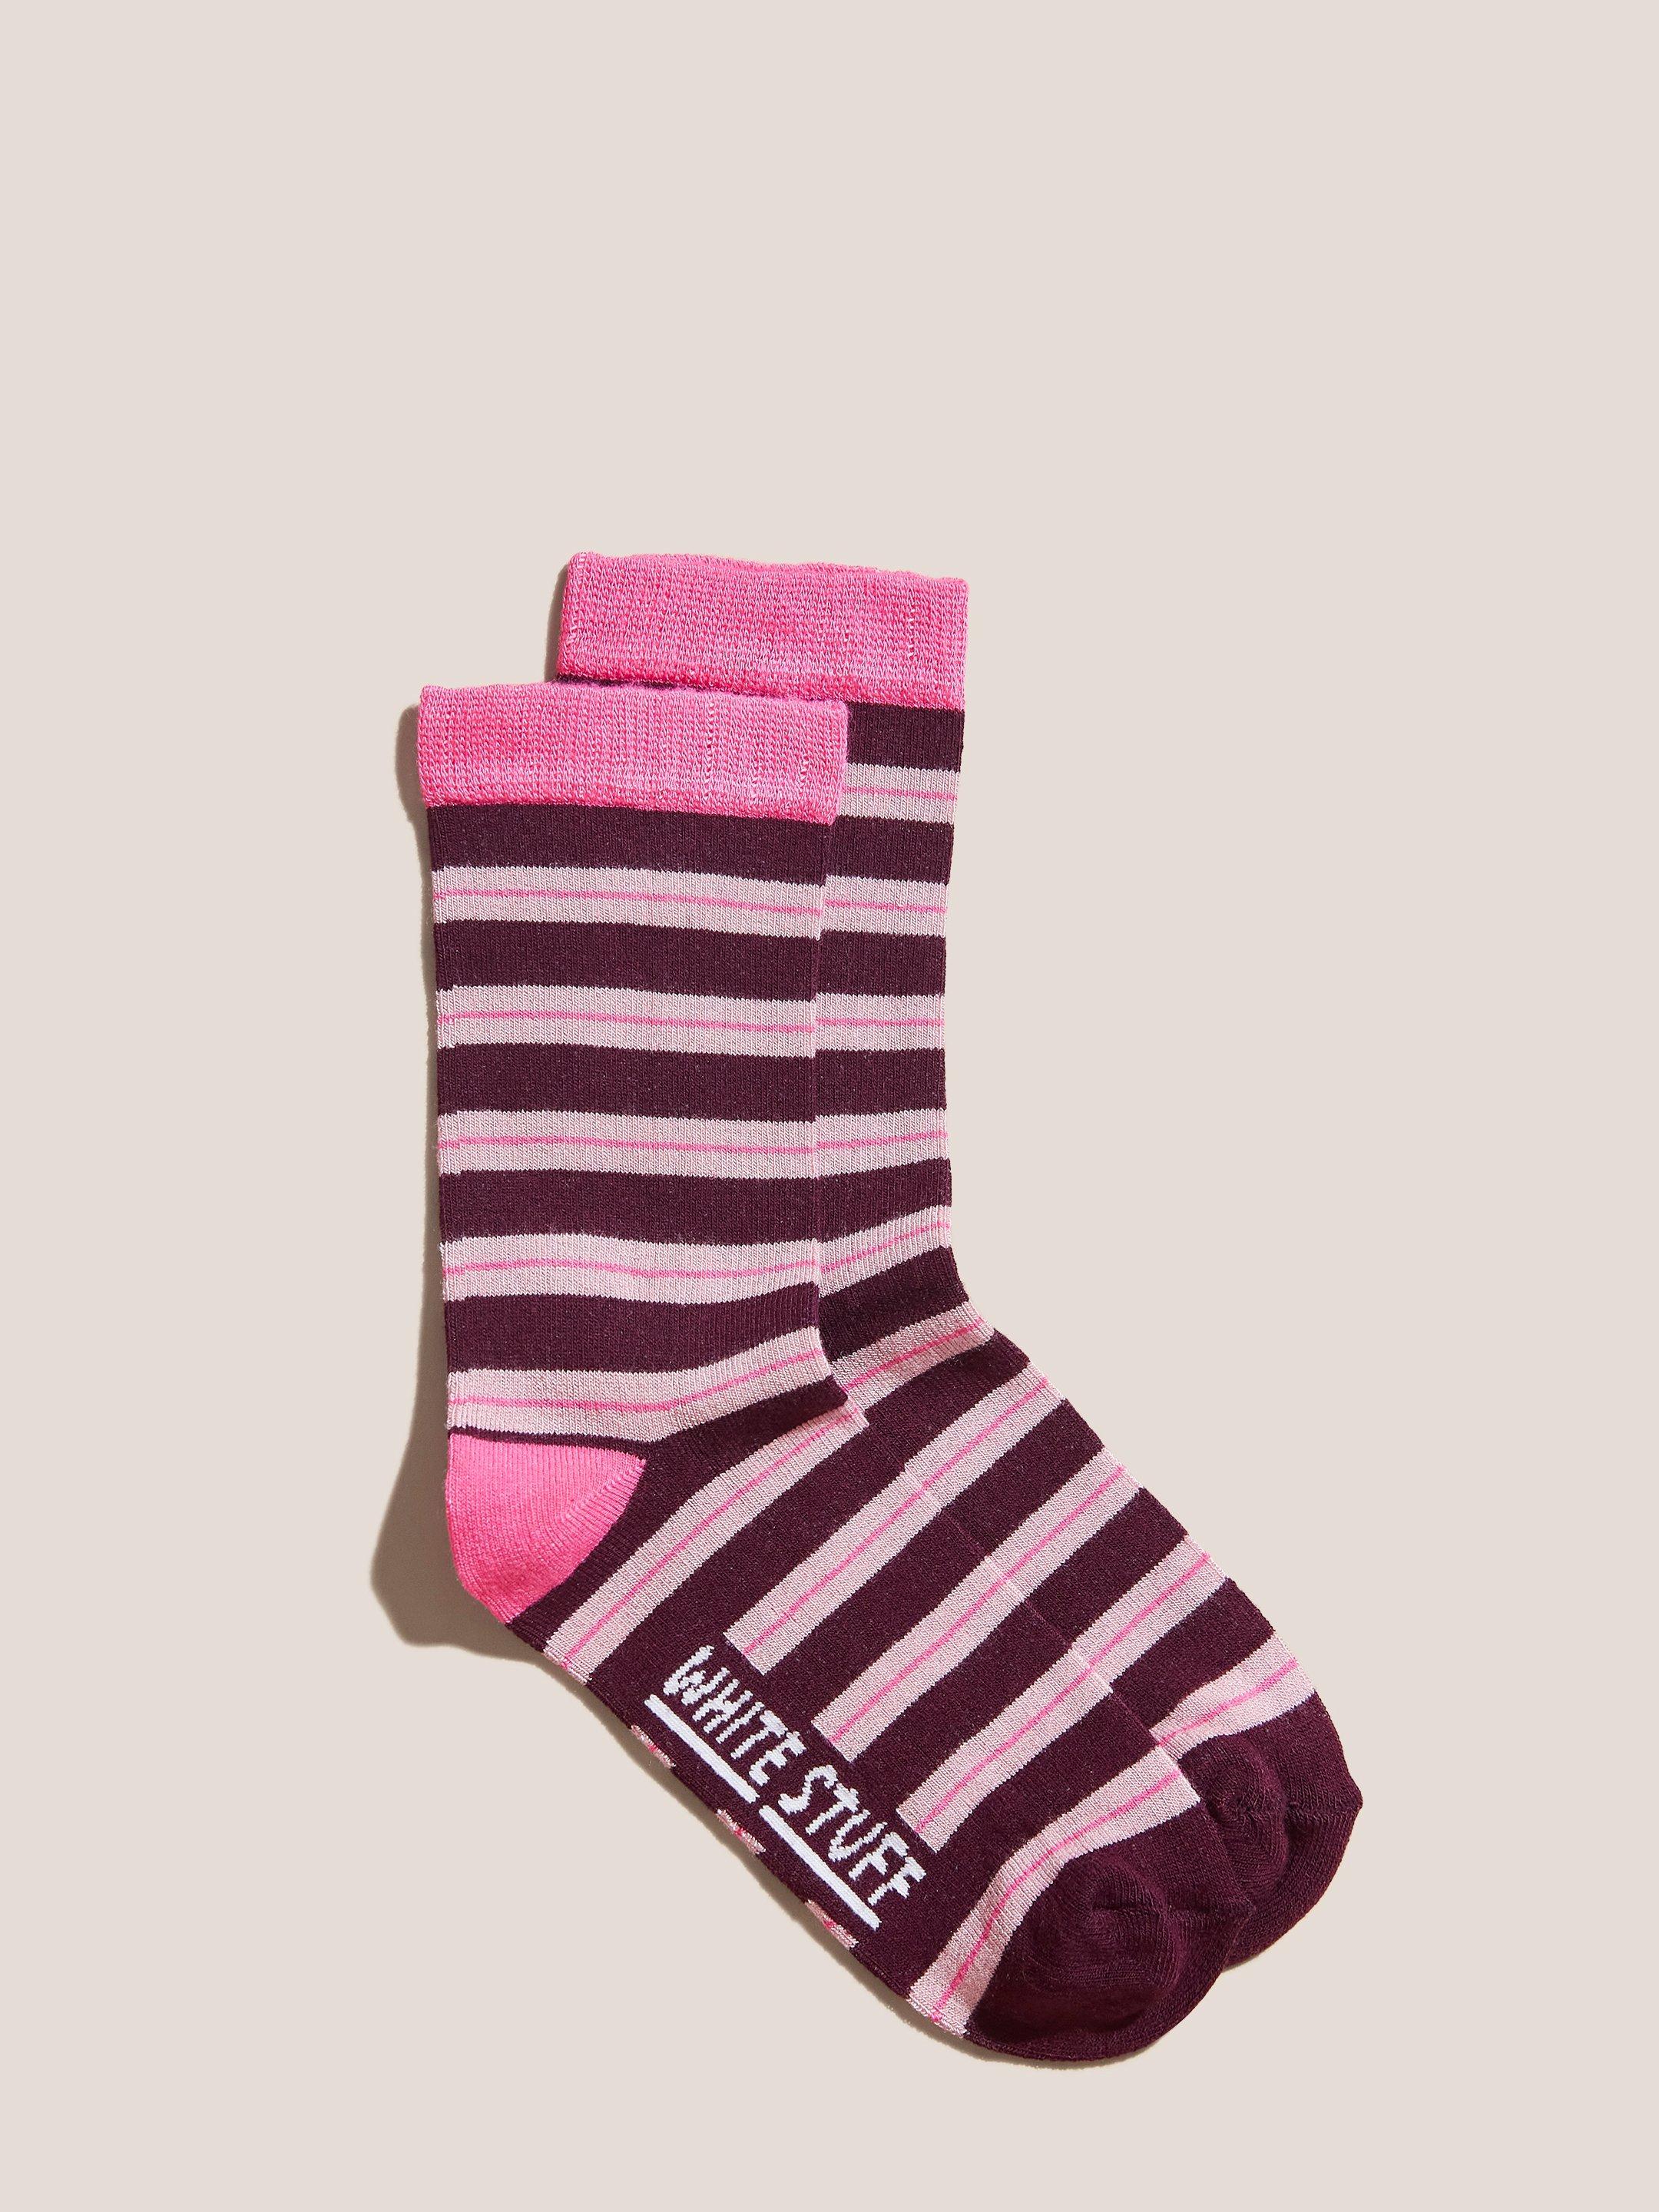 Abstract Stripe Sock in PINK MLT - FLAT FRONT